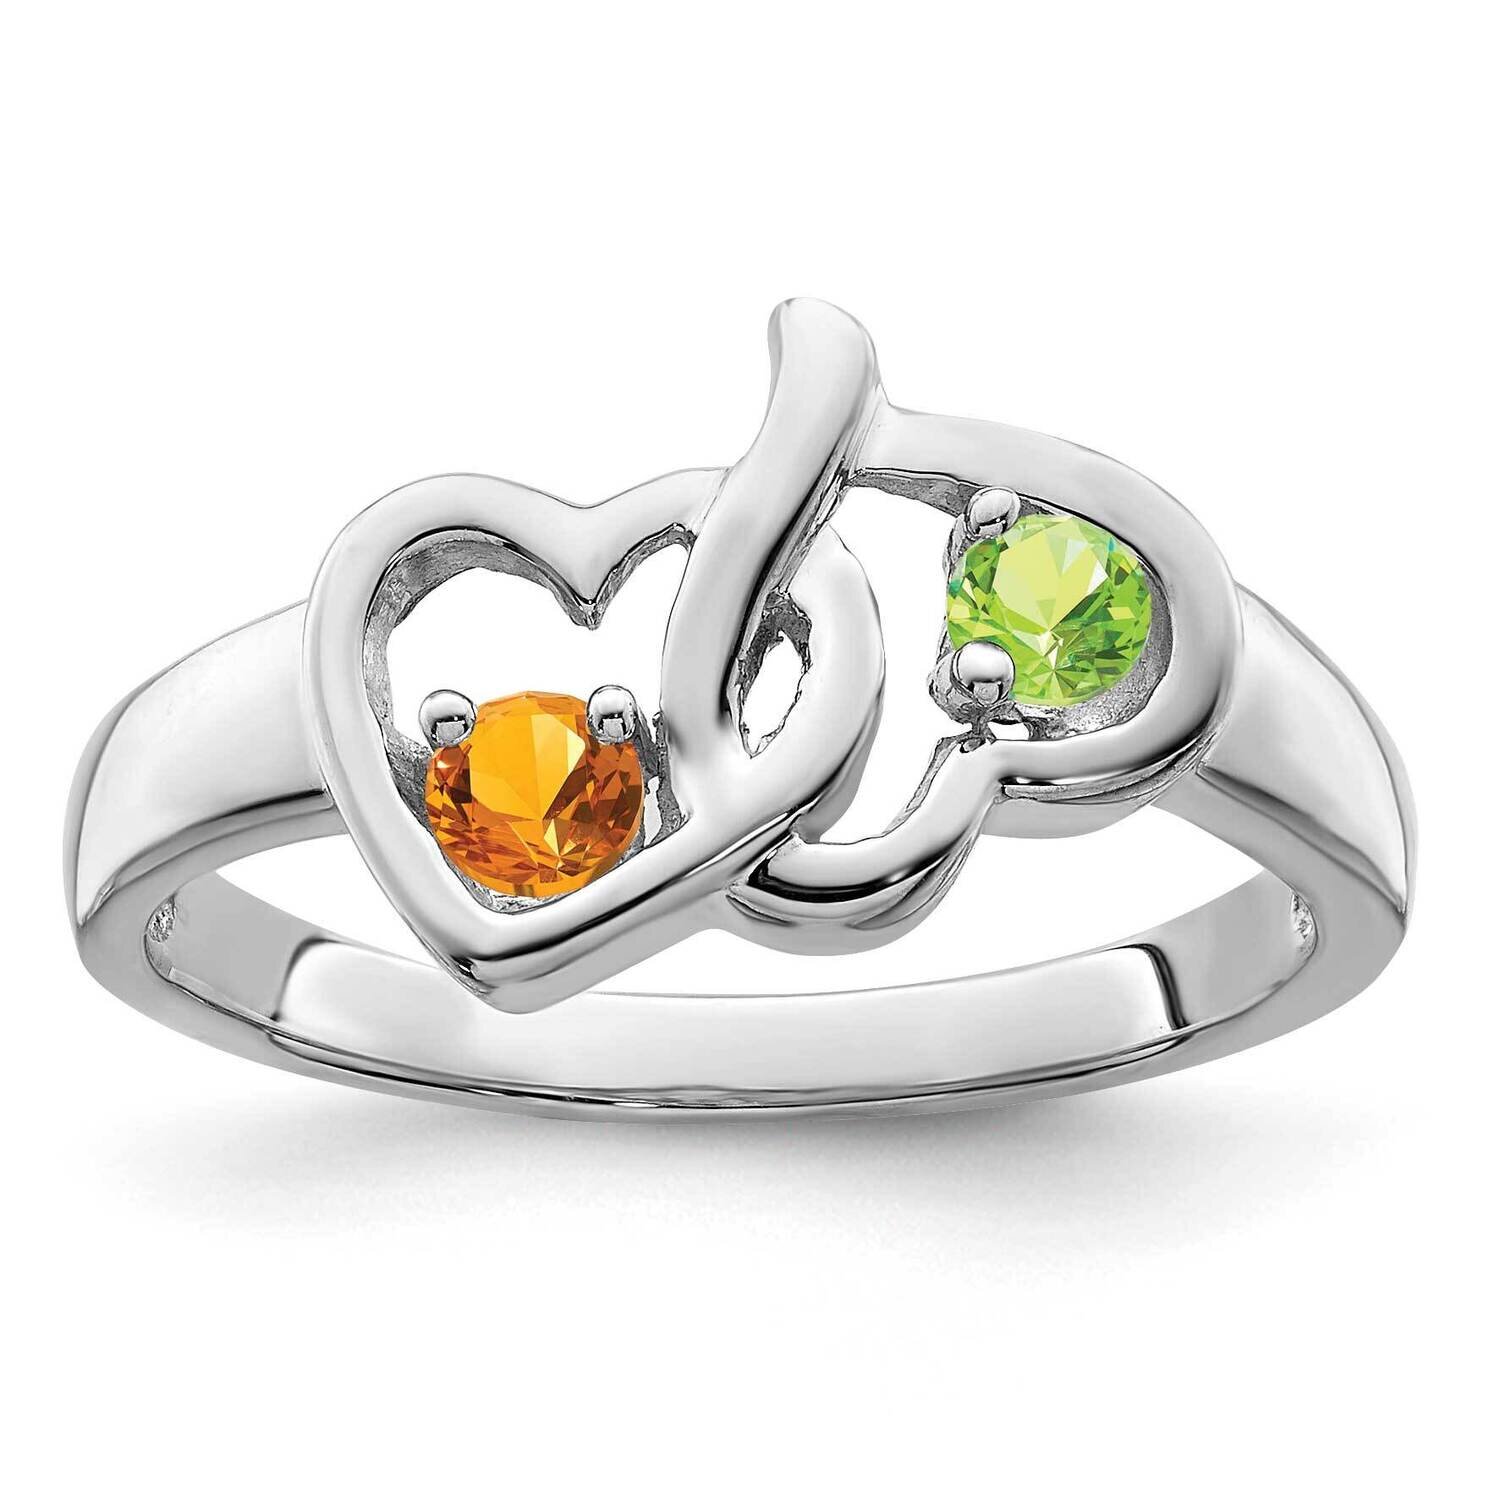 Family Jewelry Ring Mounting 14k White Gold XMR92/2W-7